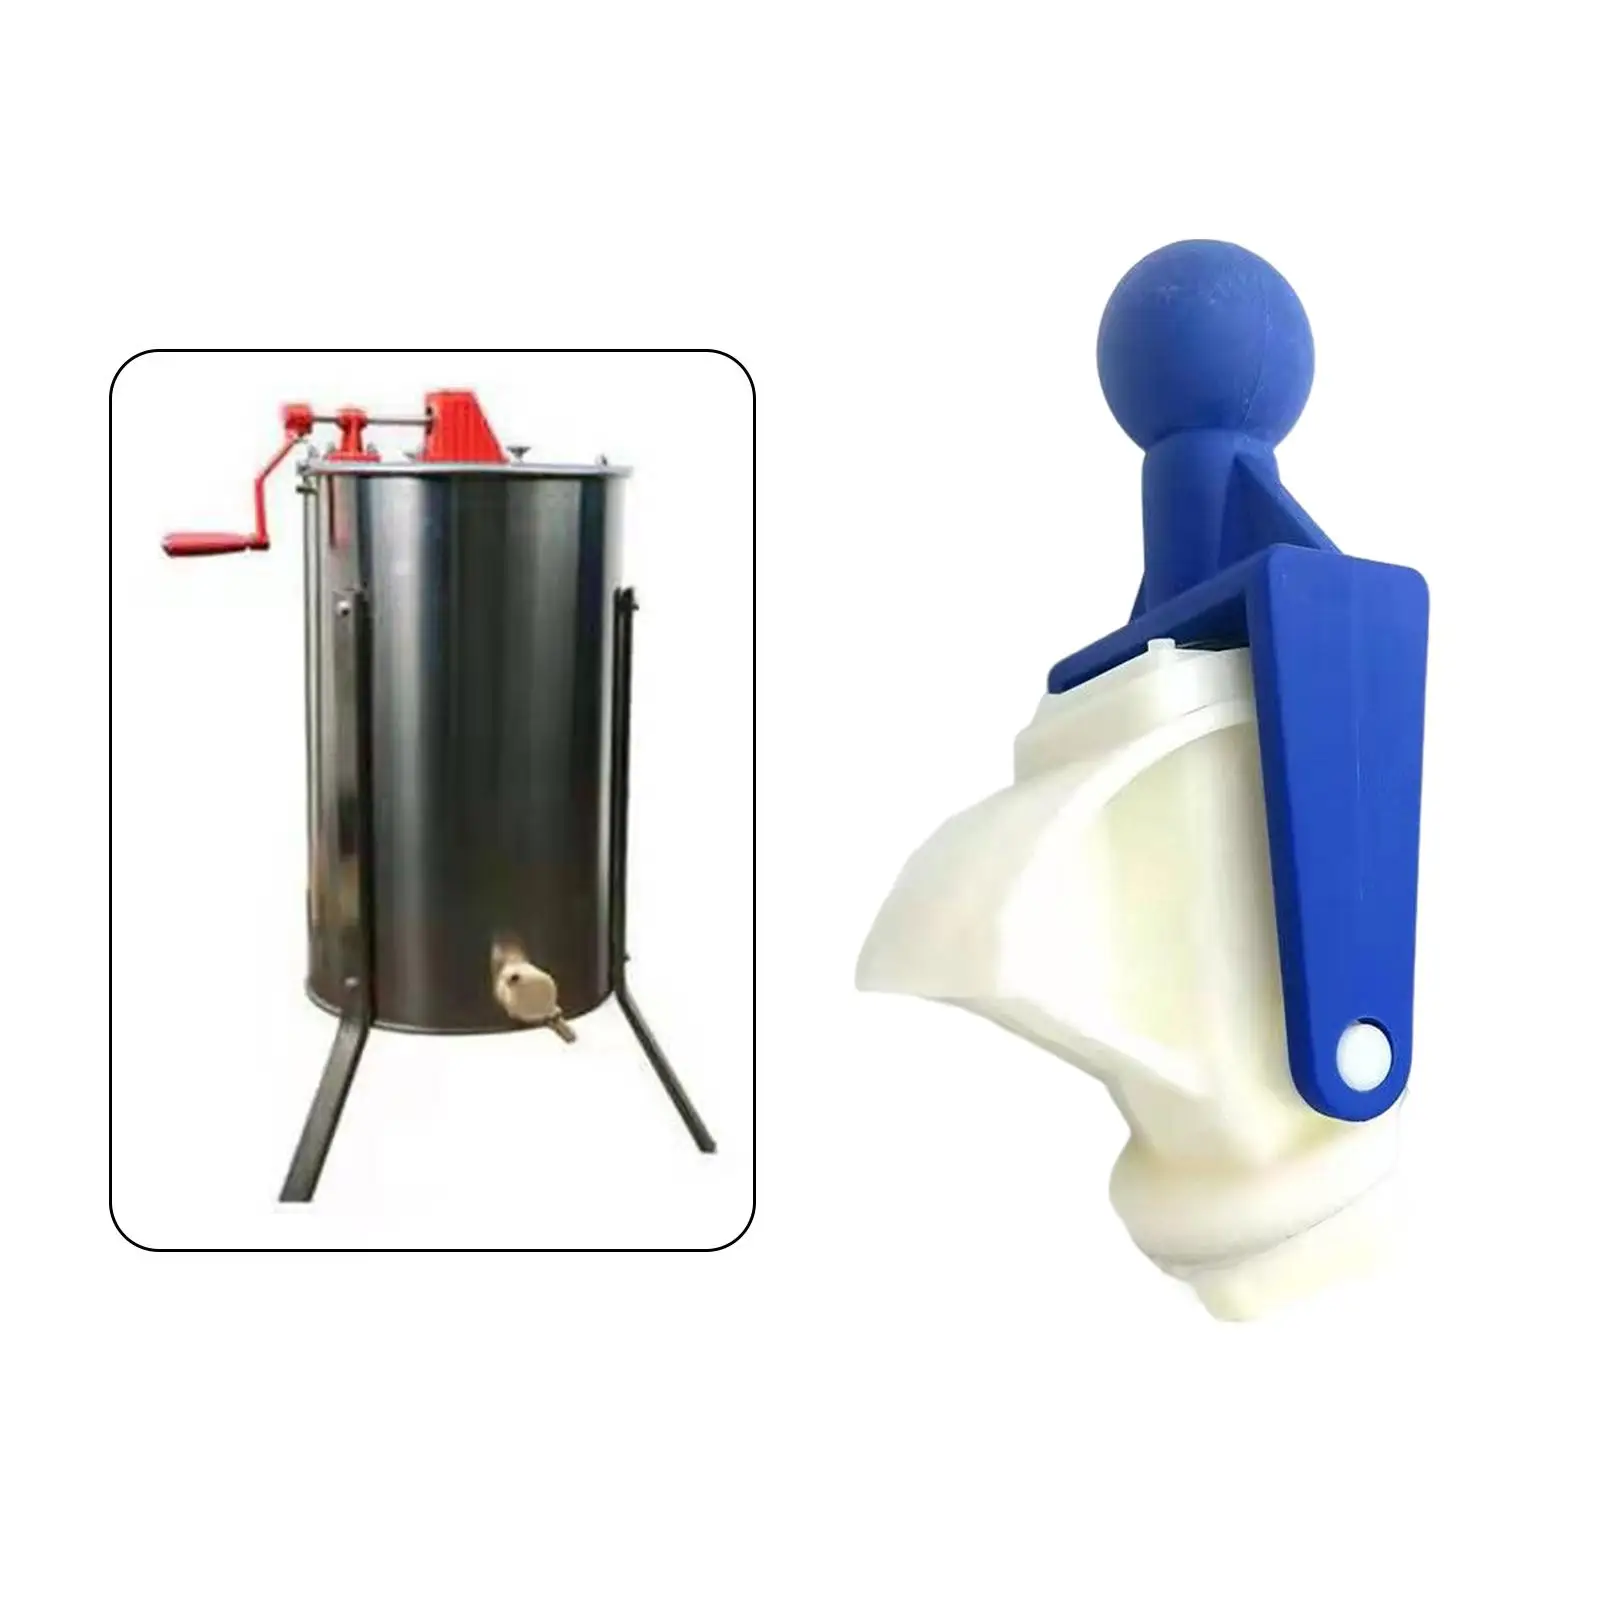 Push Type Honey Gate valves Extractor Tap Bee Bottling Equipment Gate for Beekeeping Honey Machine Supplies Accessory